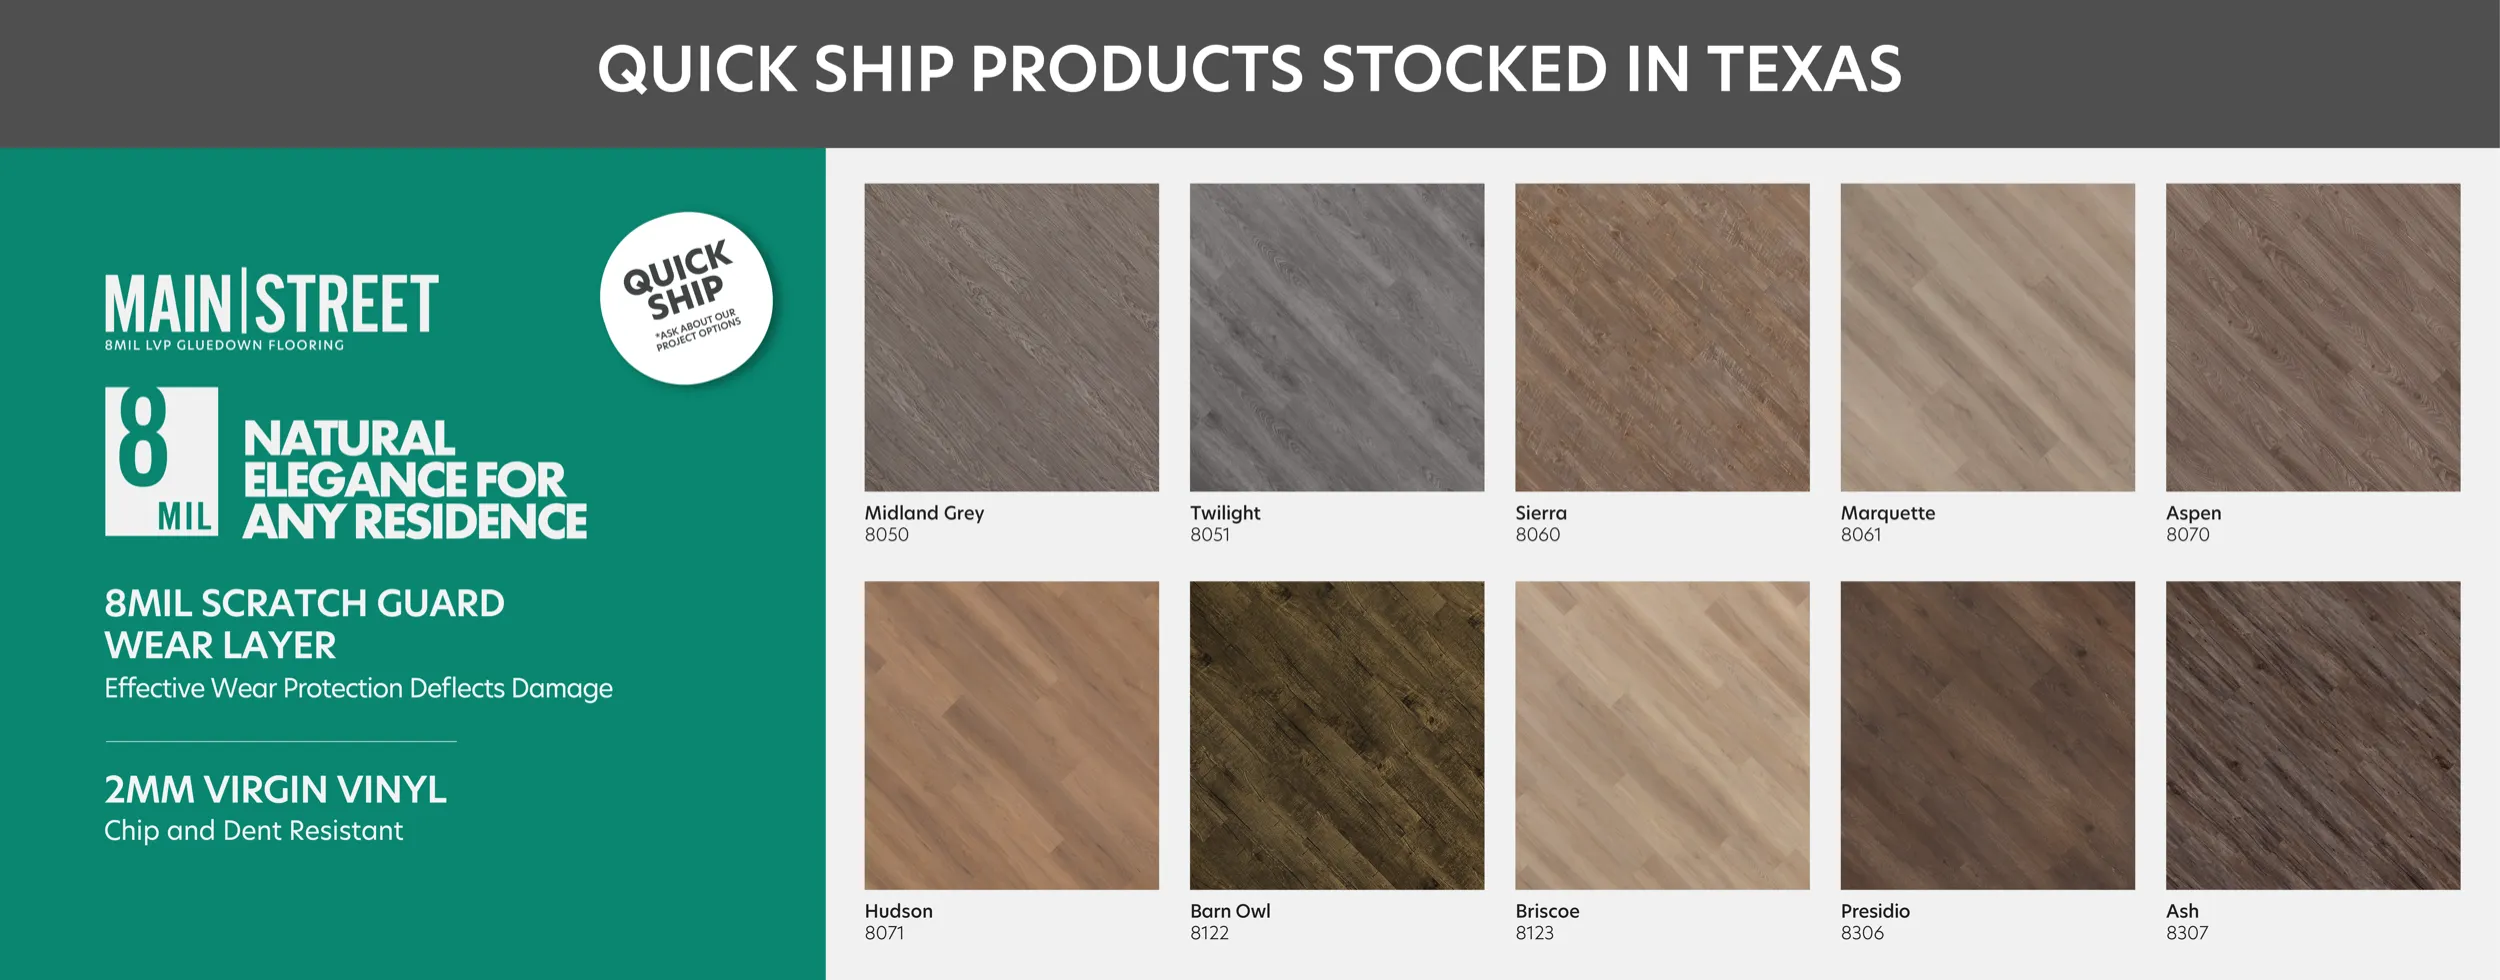 Grid of flooring designs with "quick ship products stocked in Texas" headline. Main Street flooring line info on the left.